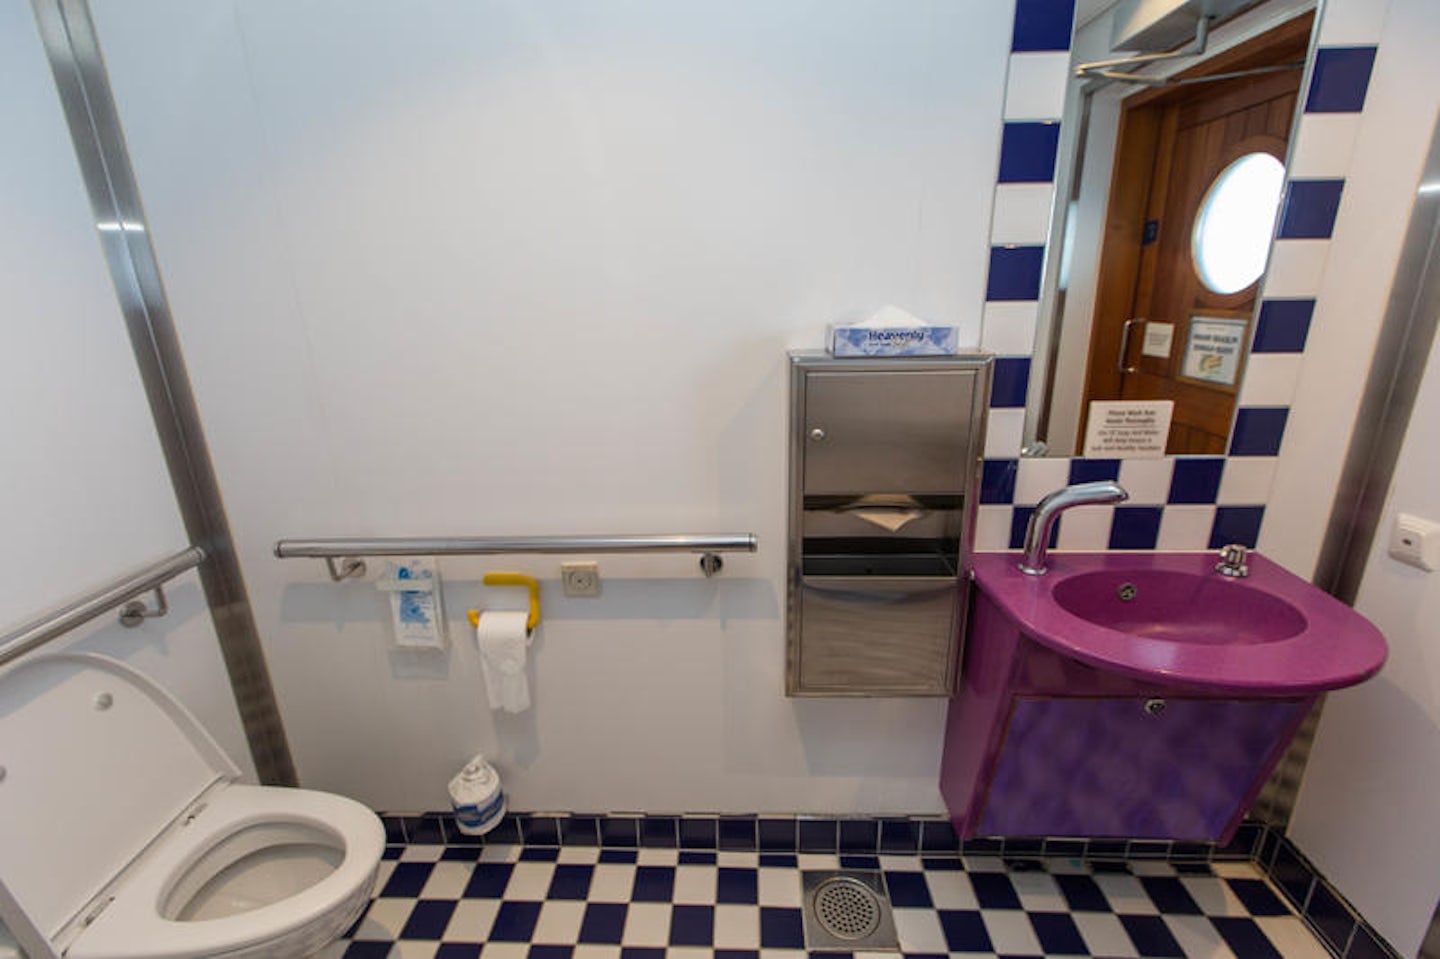 Restrooms on Liberty of the Seas